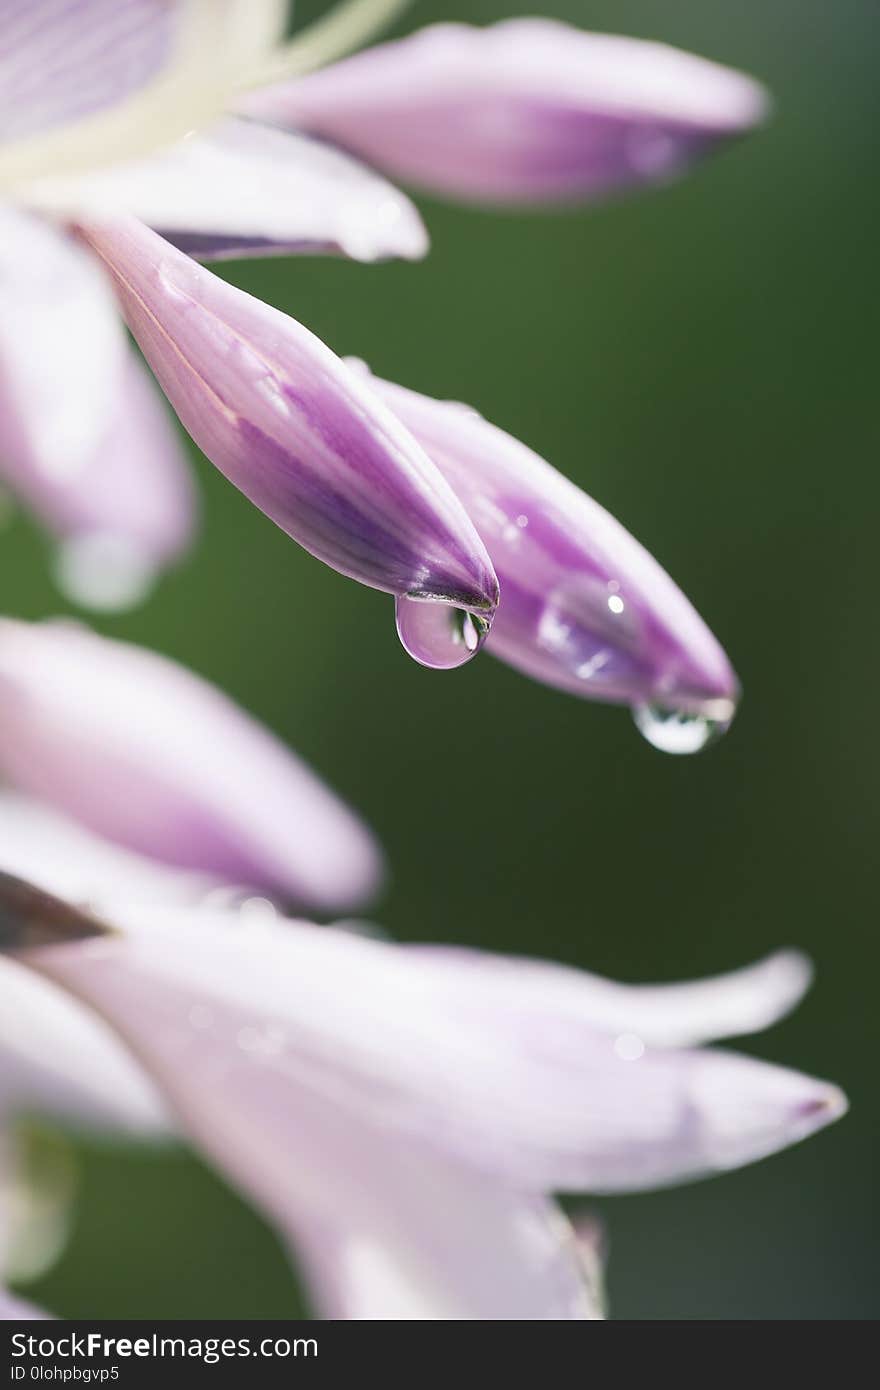 Macro photo of flower after rain with water drops on petals with shallow depth of field. Macro photo of flower after rain with water drops on petals with shallow depth of field.